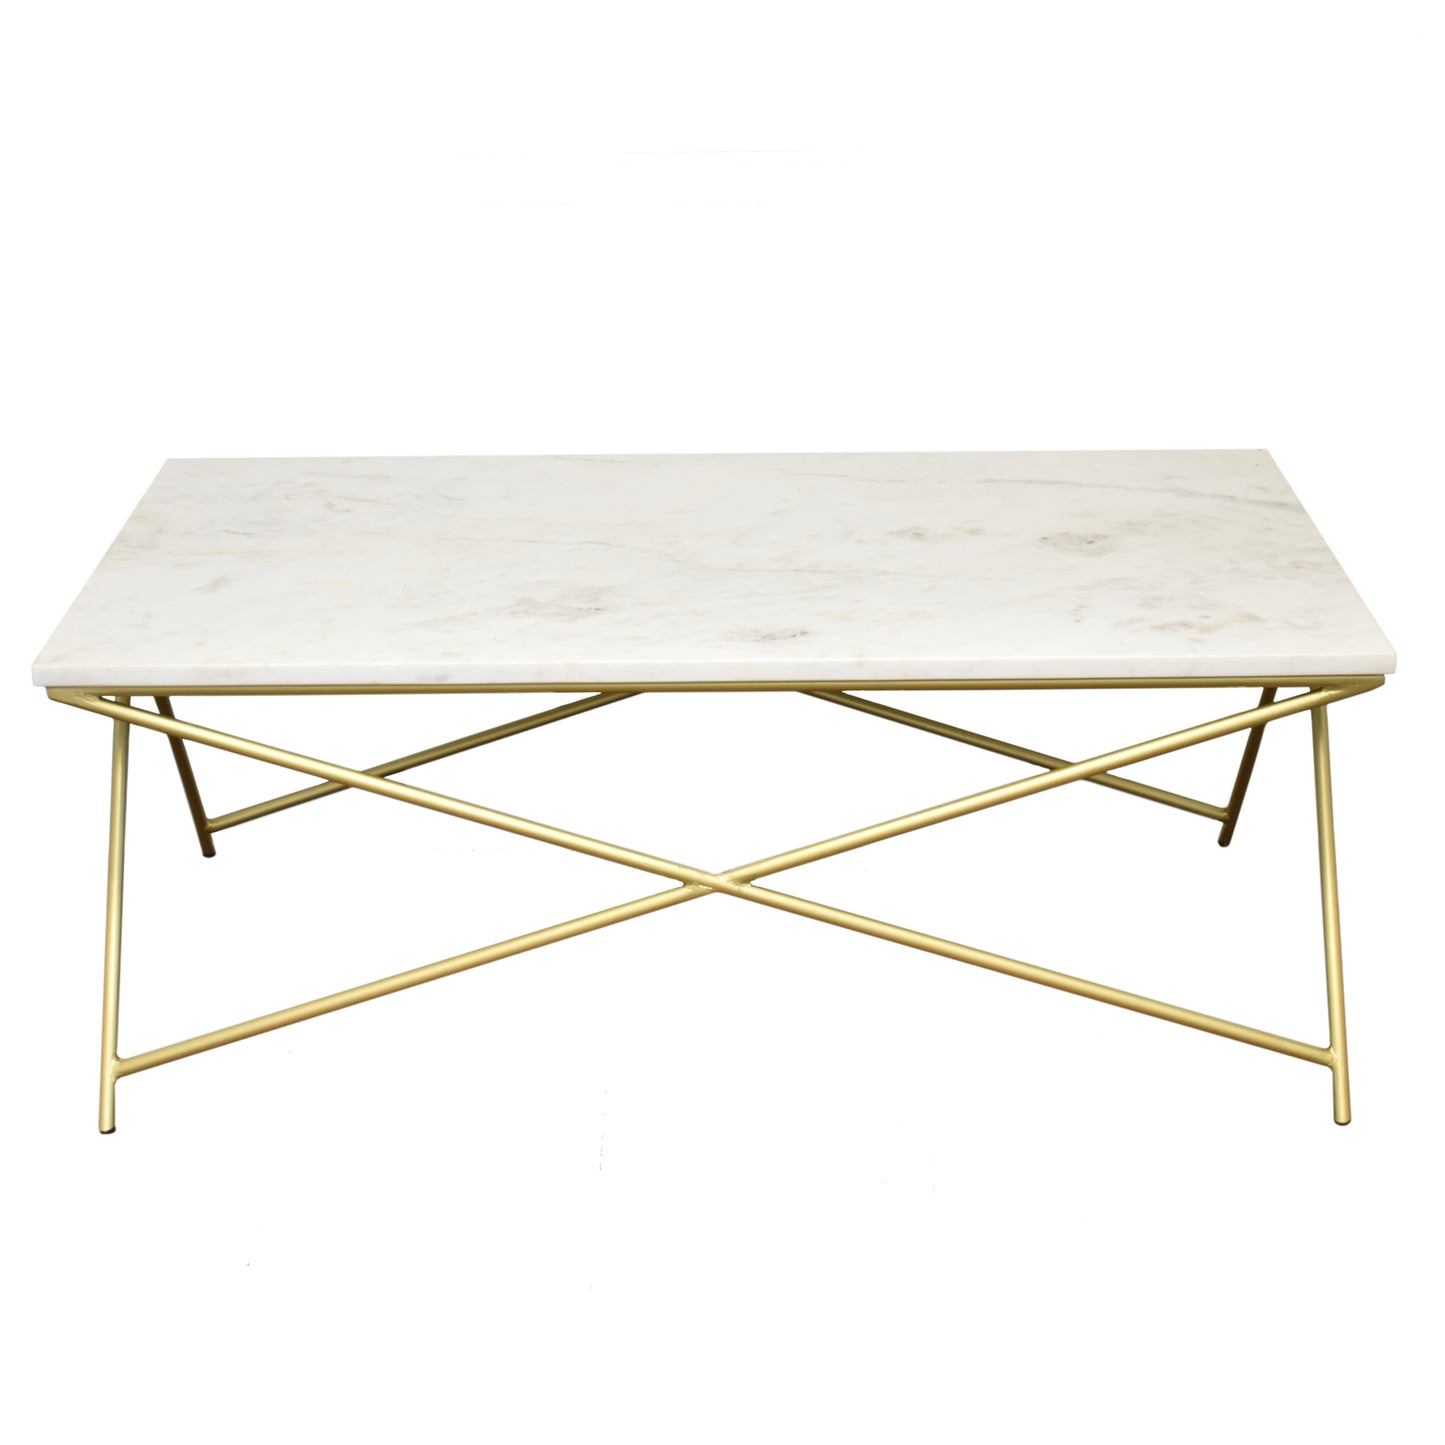 Xander Coffee Table with White Marble Top (Pick Up Only)